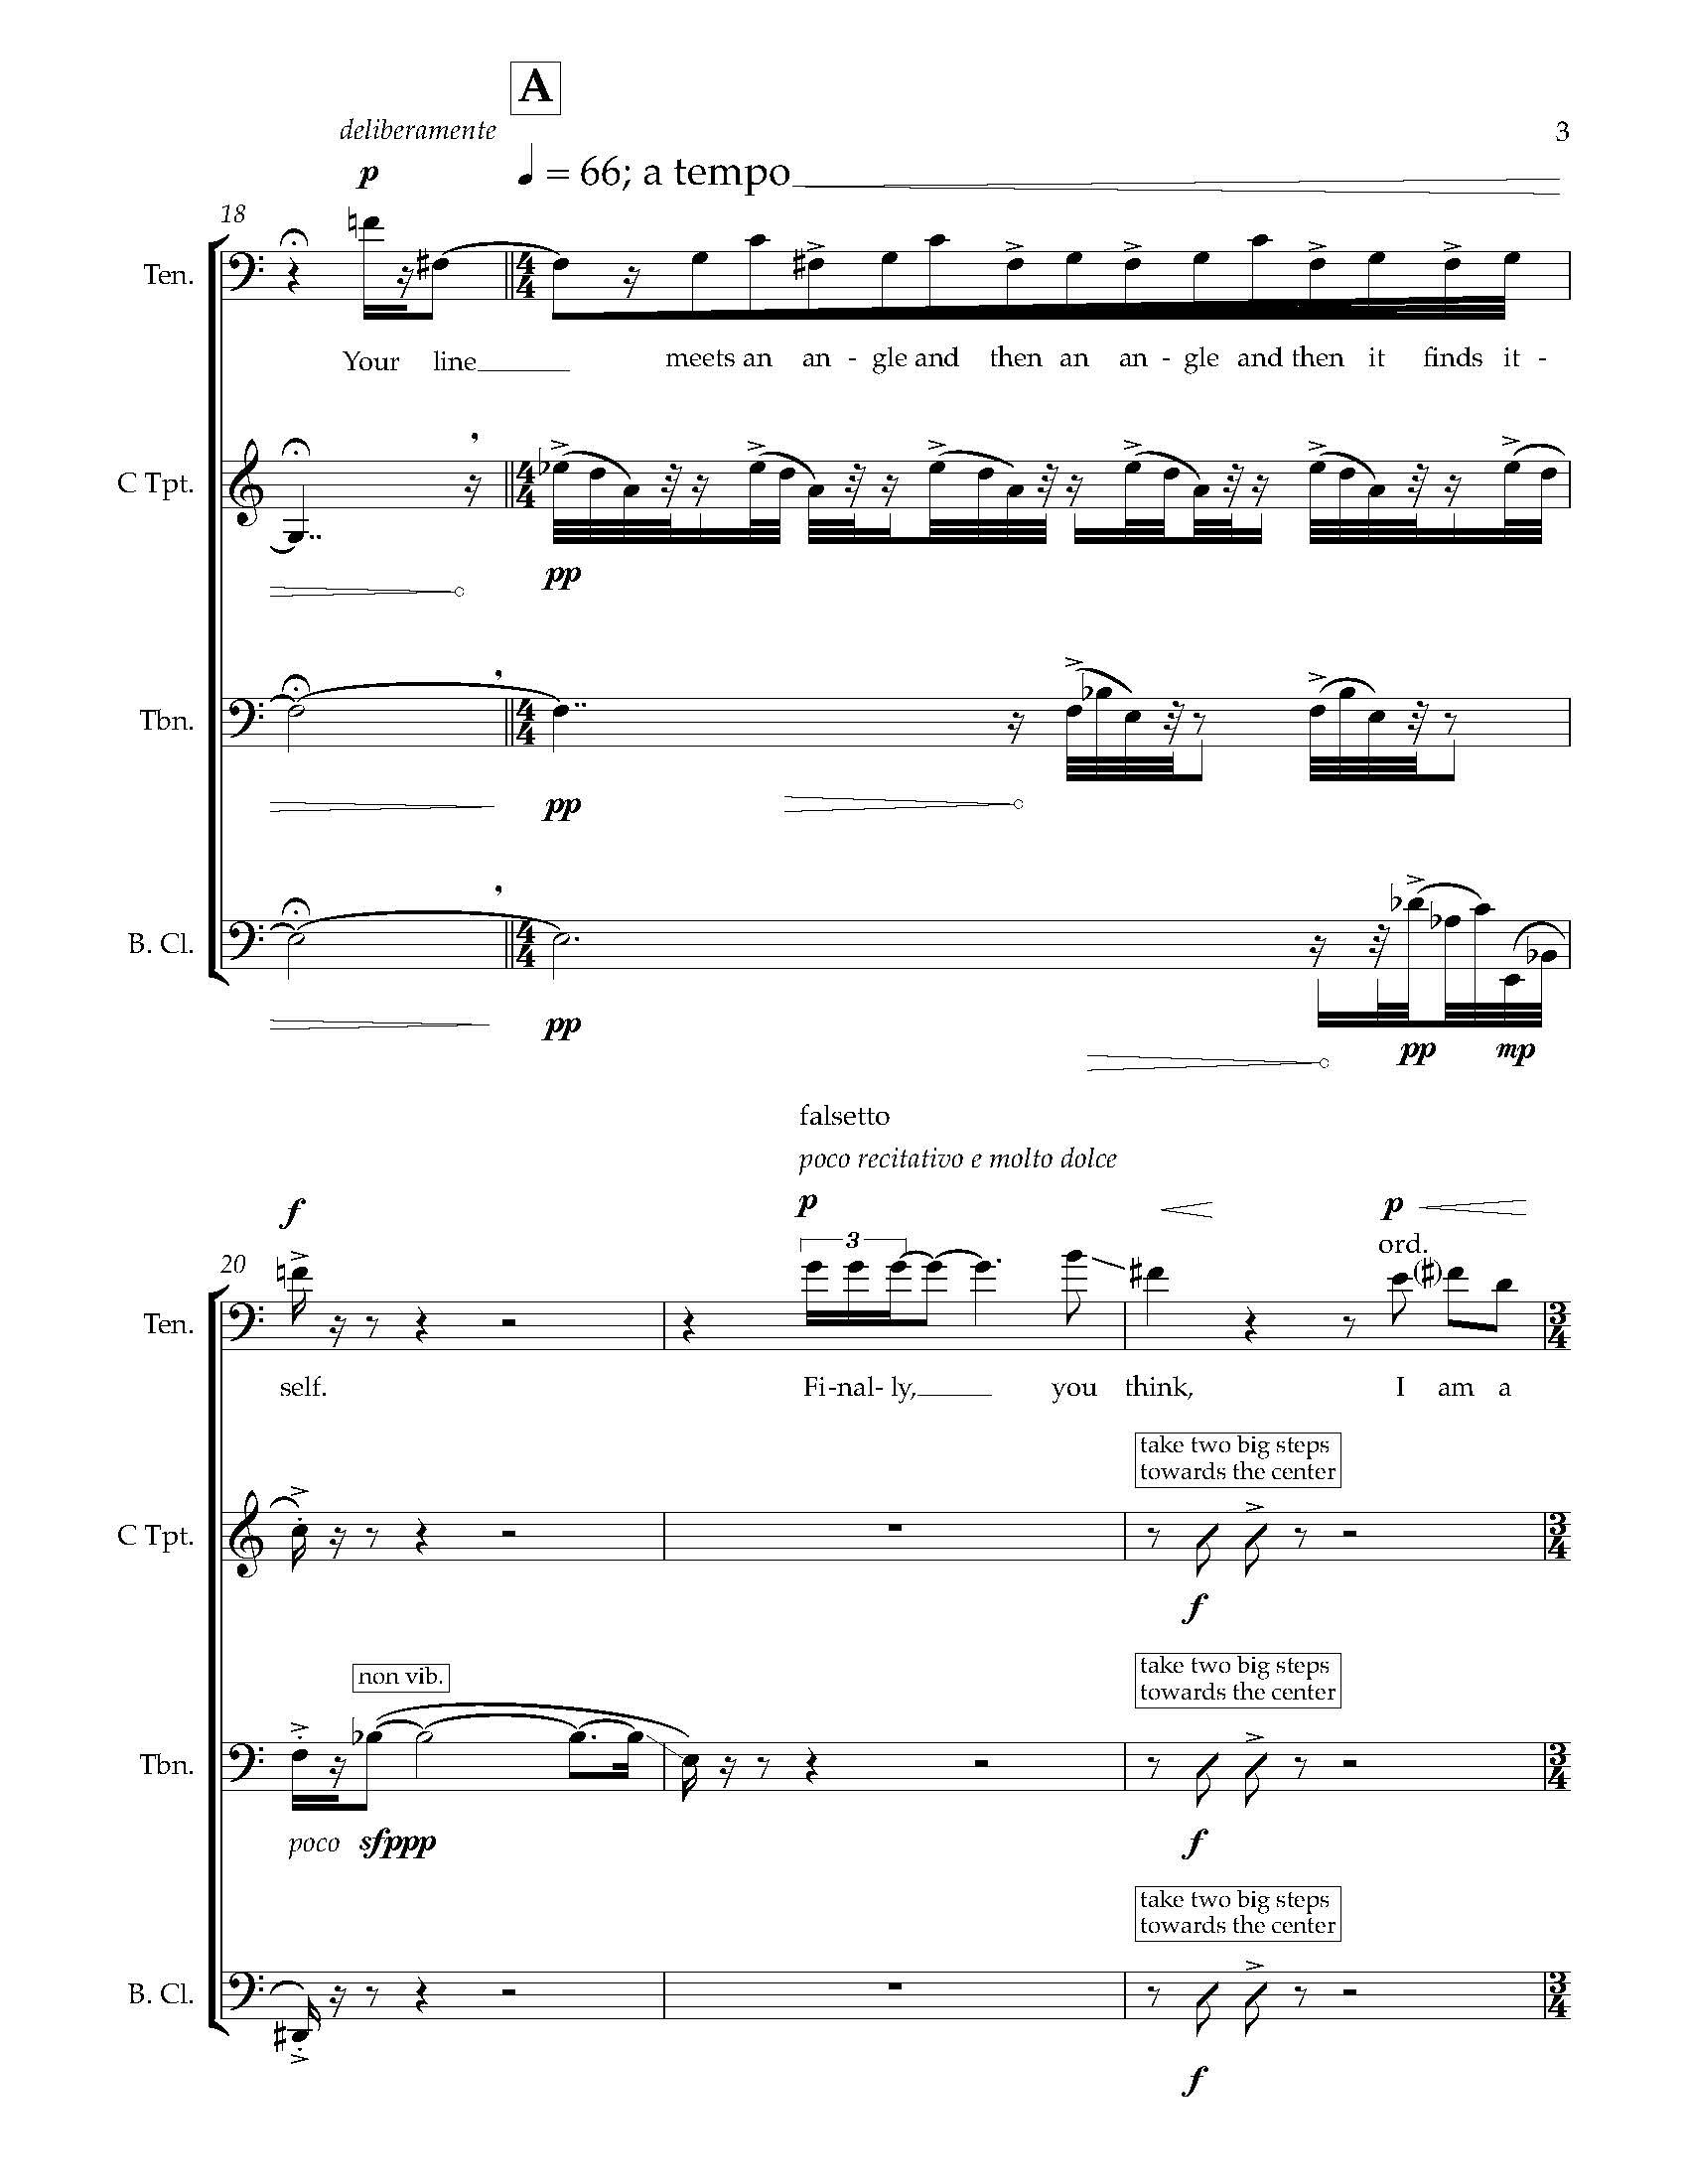 Many Worlds [1] - Complete Score_Page_12.jpg